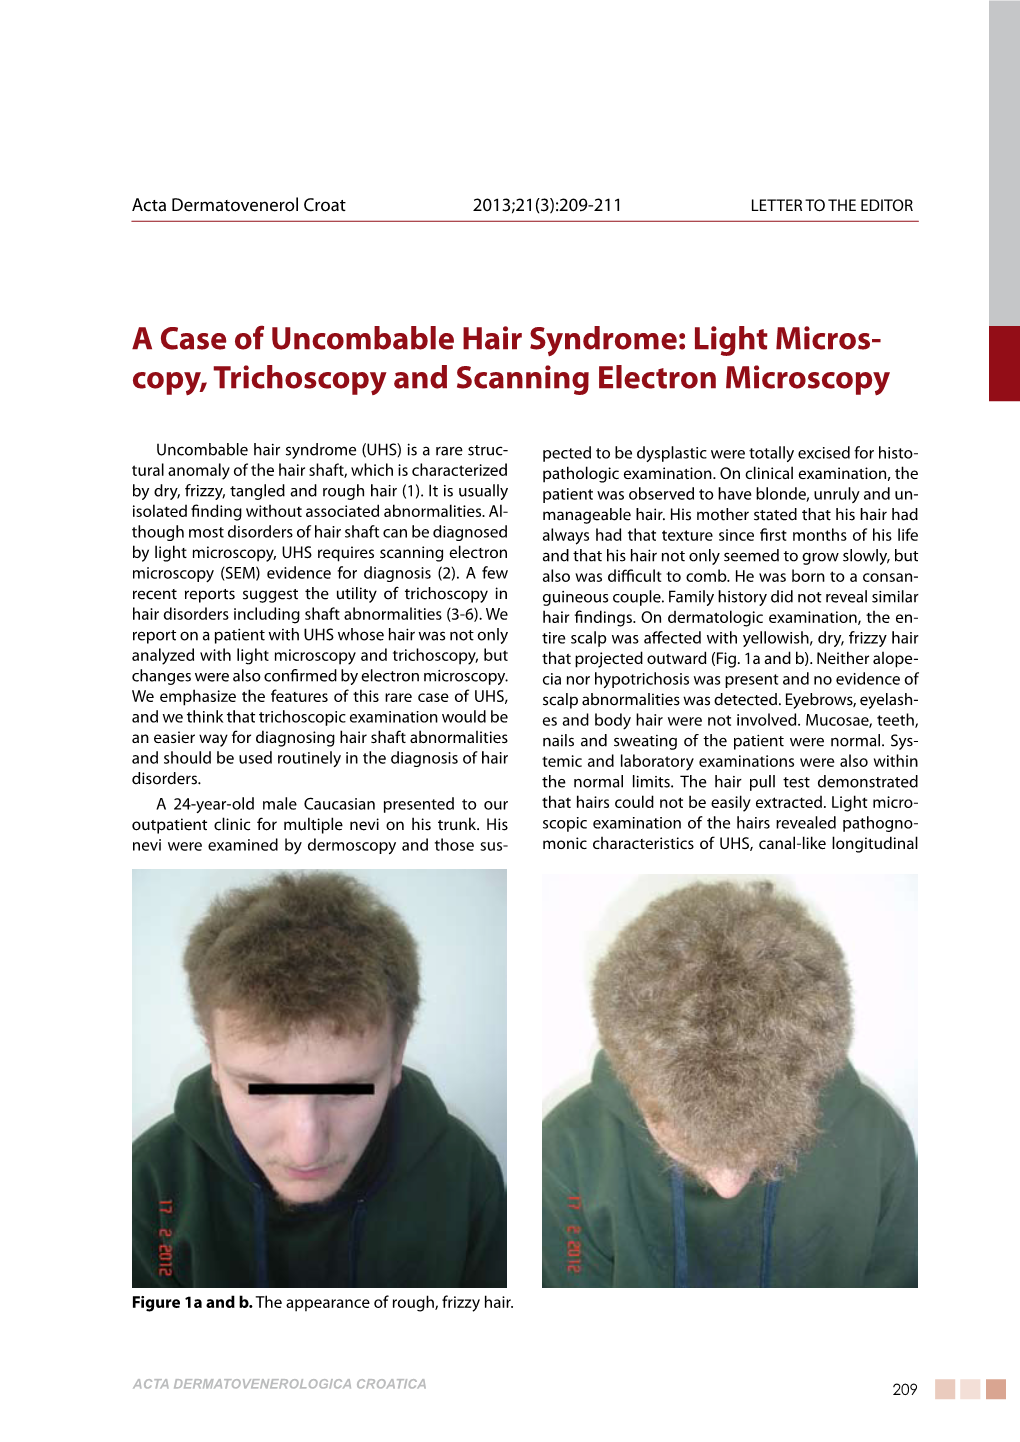 A Case of Uncombable Hair Syndrome: Light Micros- Copy, Trichoscopy and Scanning Electron Microscopy